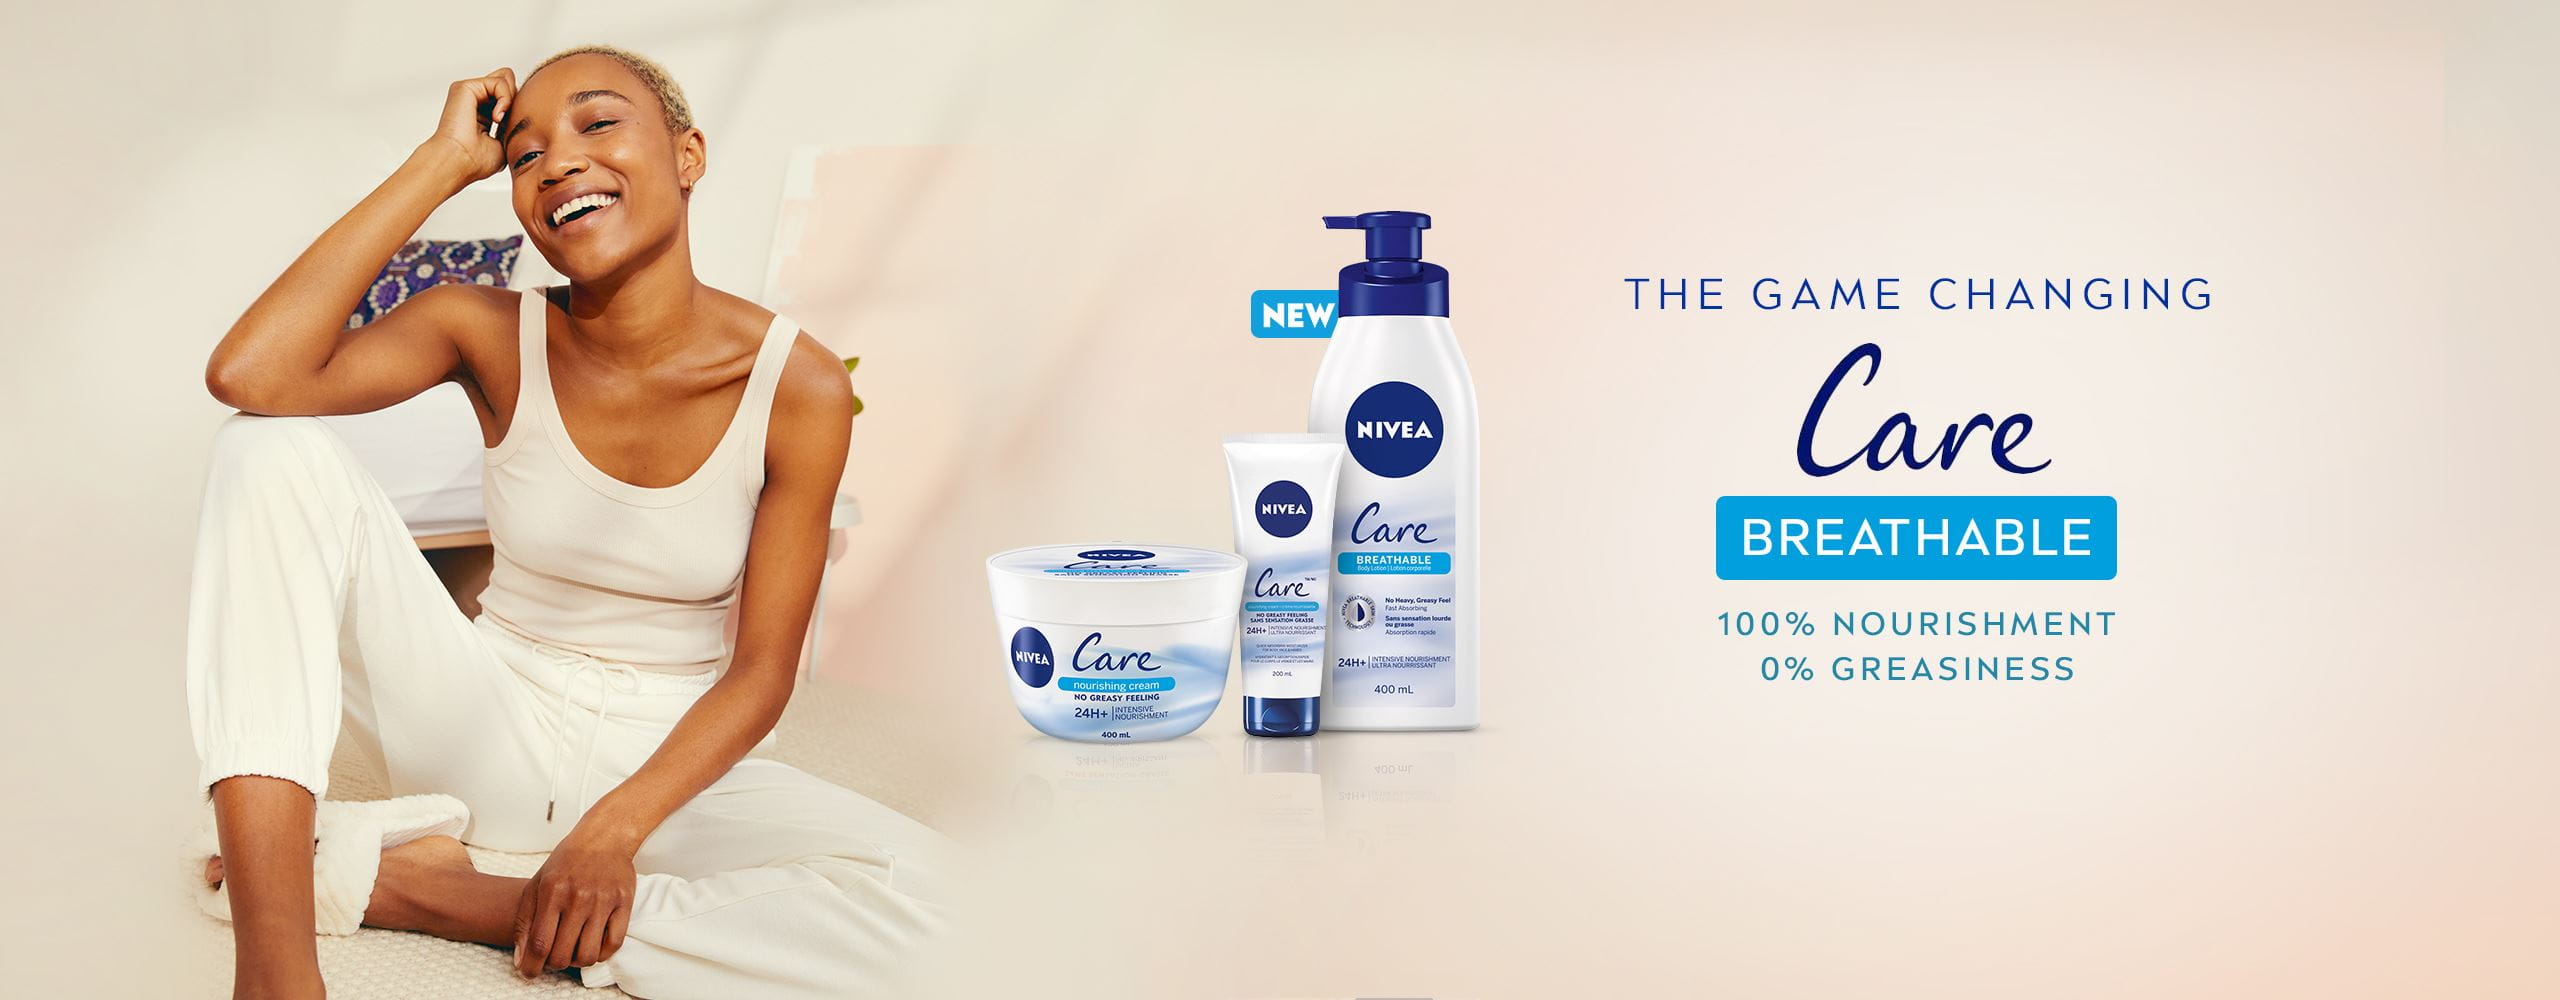 View of three Nivea Care Breathable products with description text and model leaning against blue pillow on a cream background.